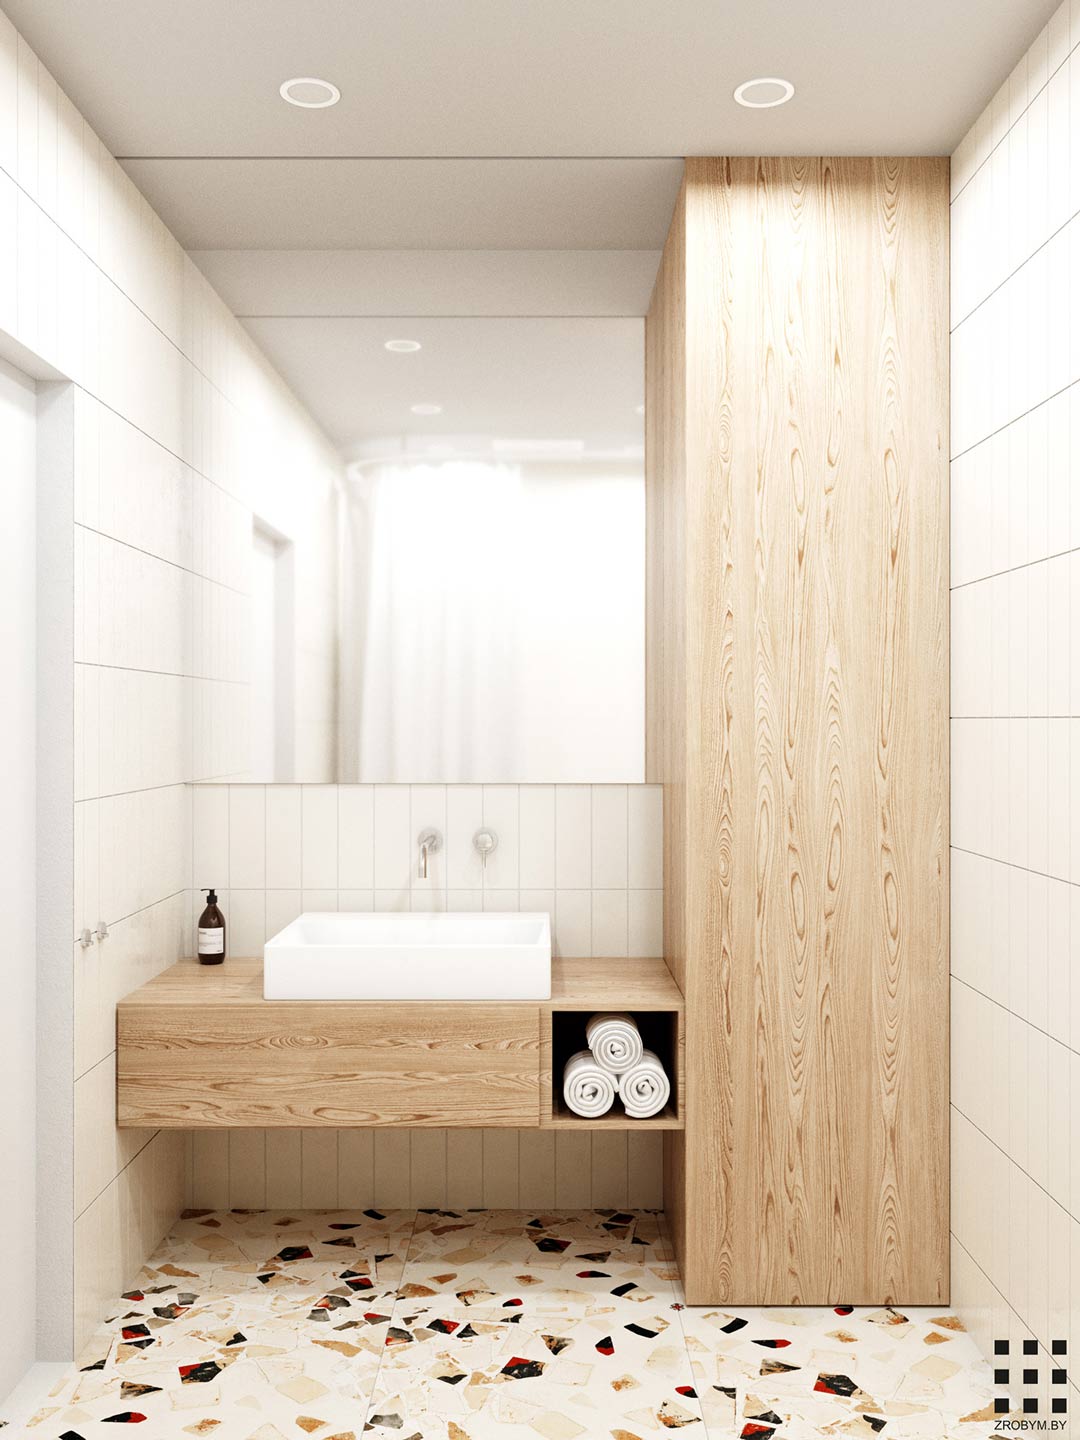 Small laundry Ideas a bathroom and laundry combination with warm timber sliding door to conceal the washing machine and terrazo floor